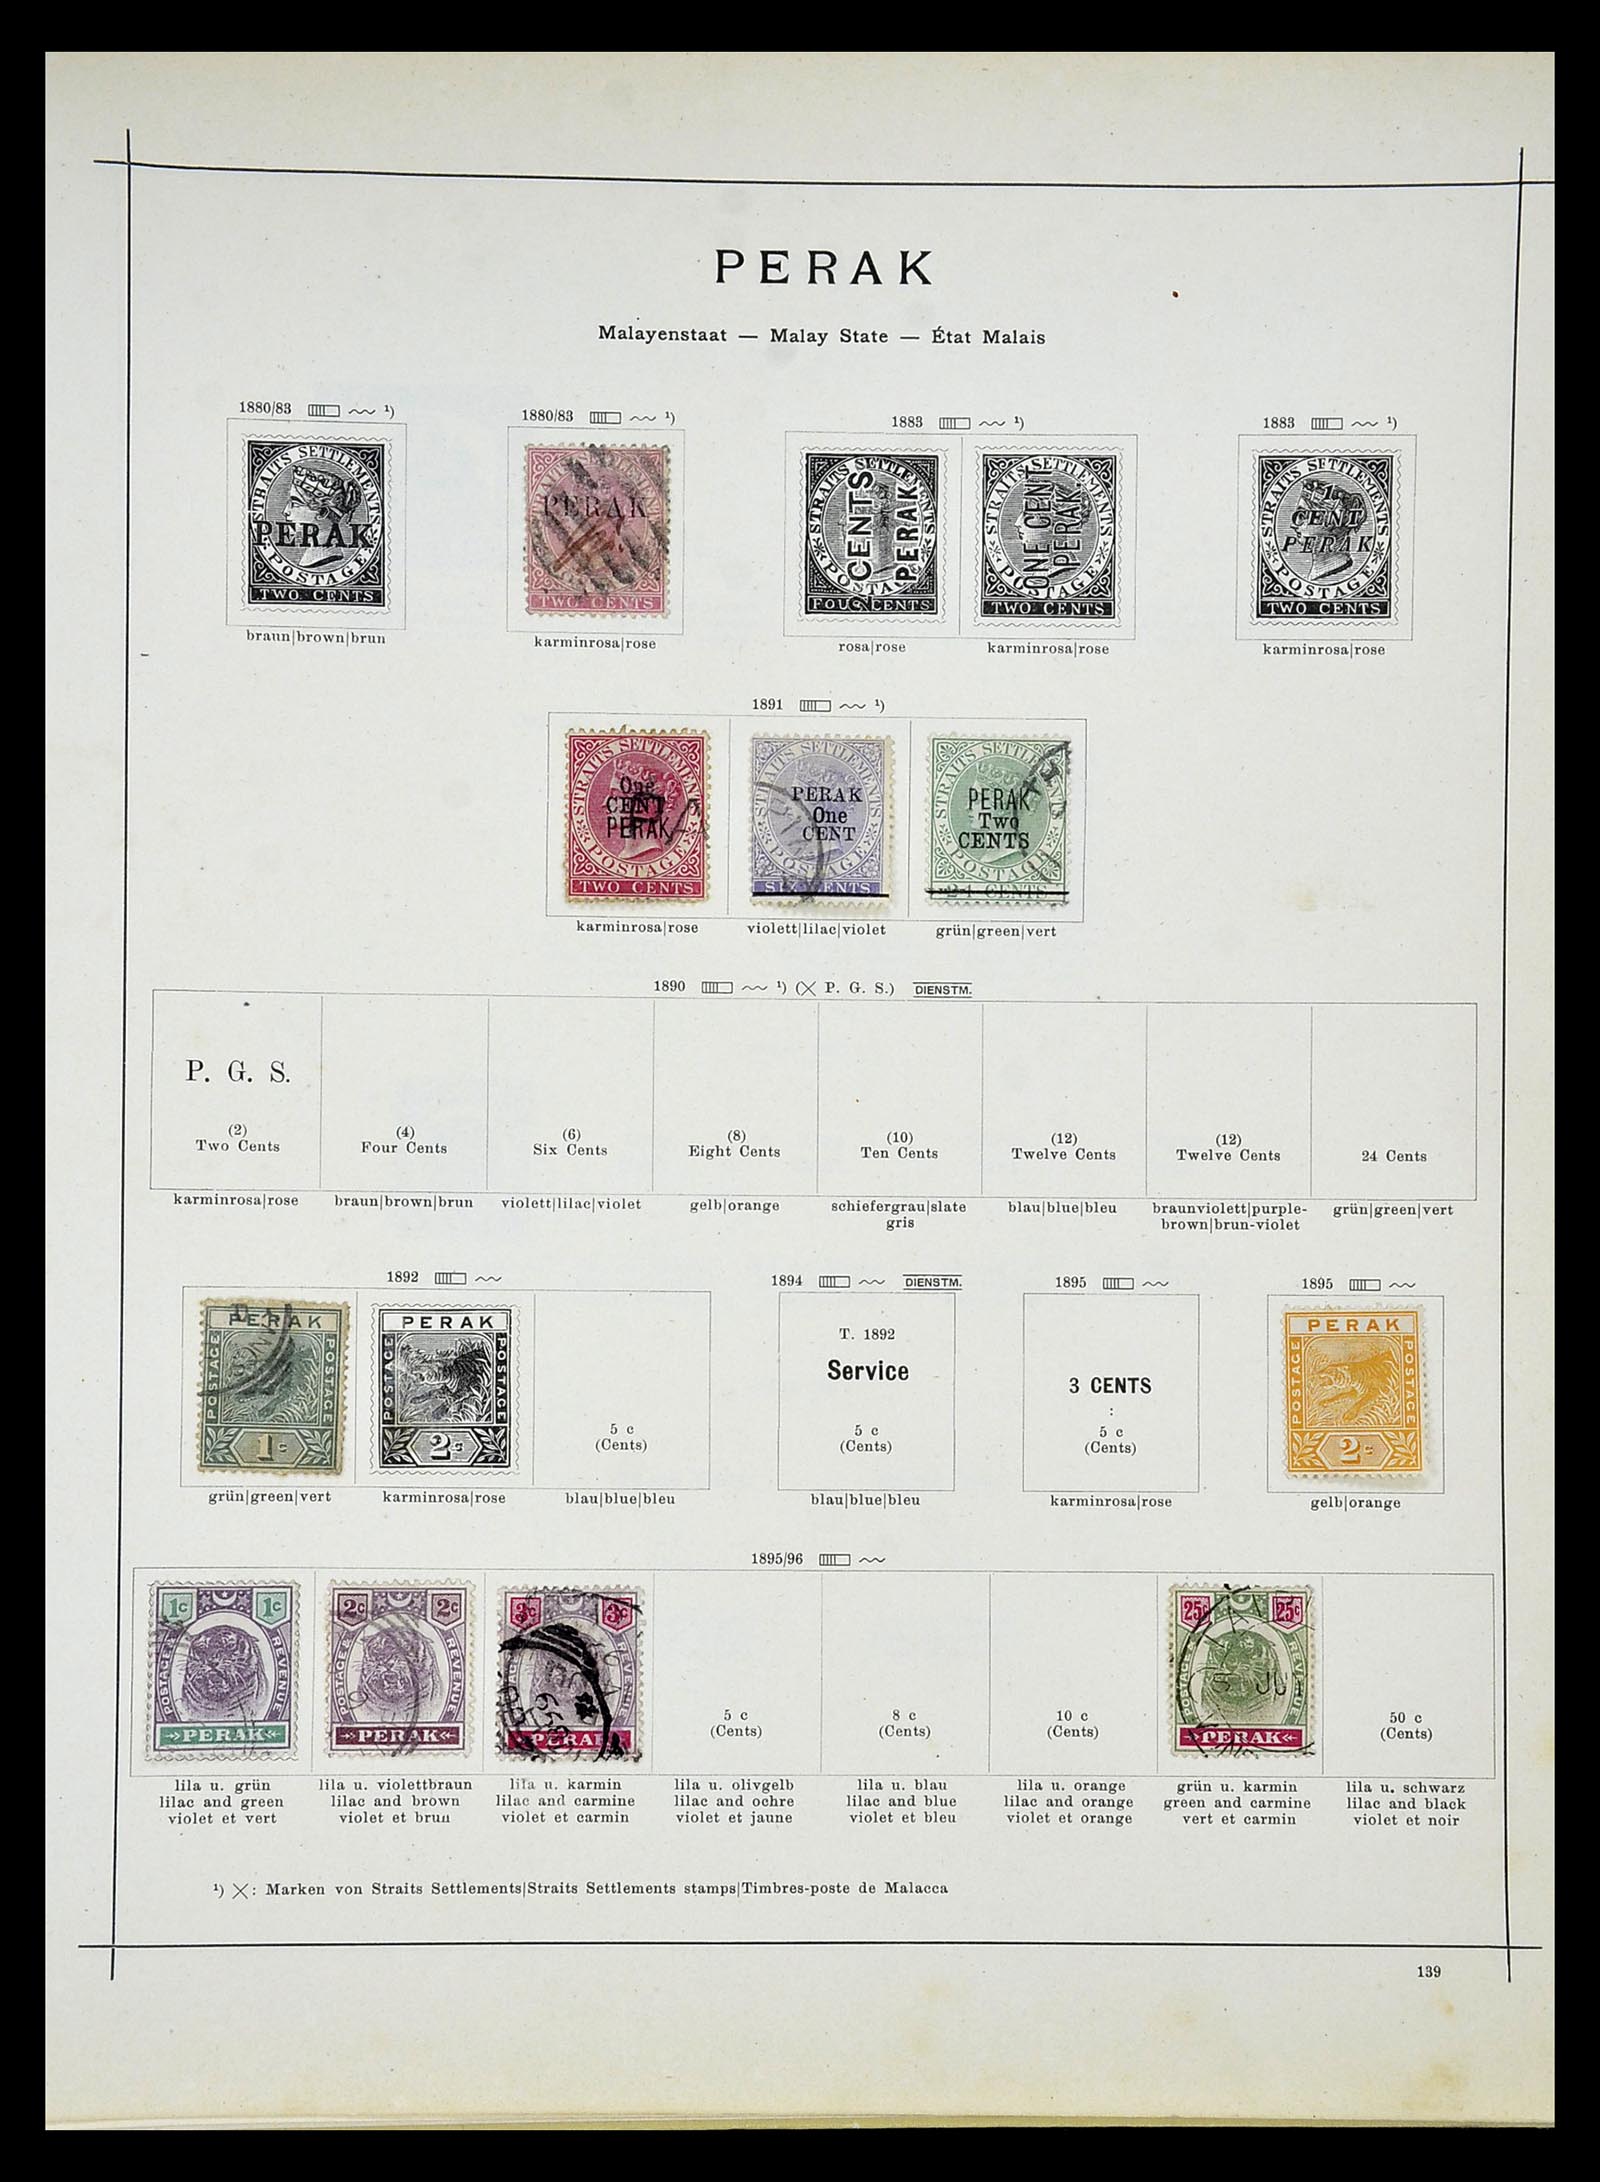 34892 026 - Stamp Collection 34892 Straits Settlements, Malaysia and Singapore 1868-